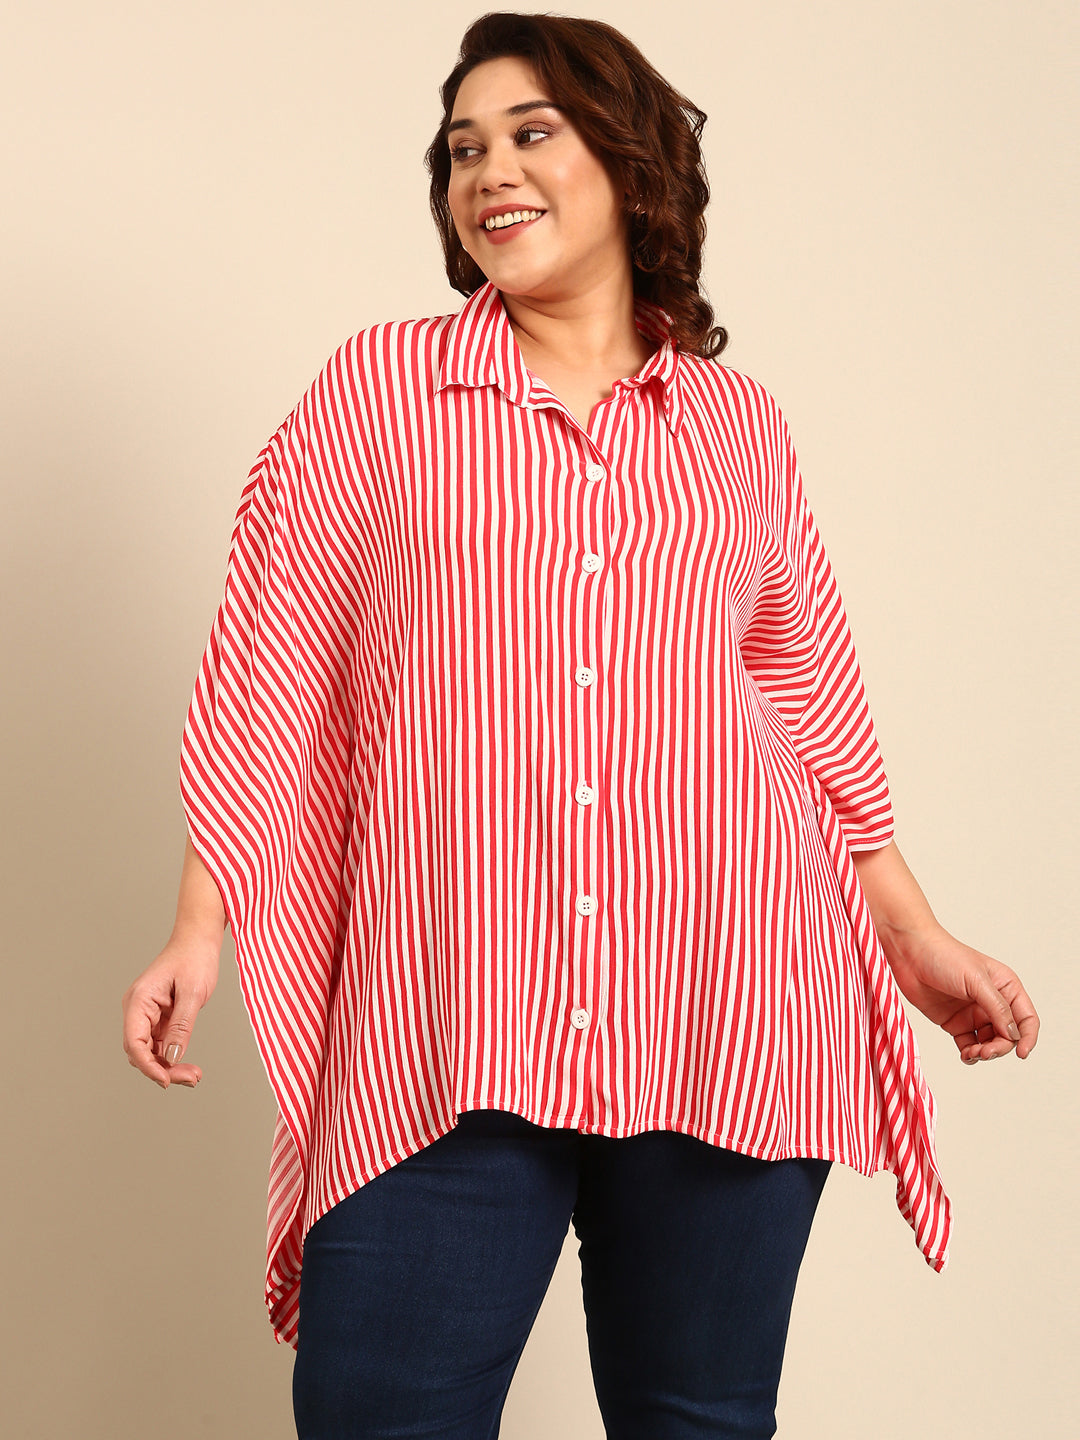 RED AND WHITE STRIPED SHIRT